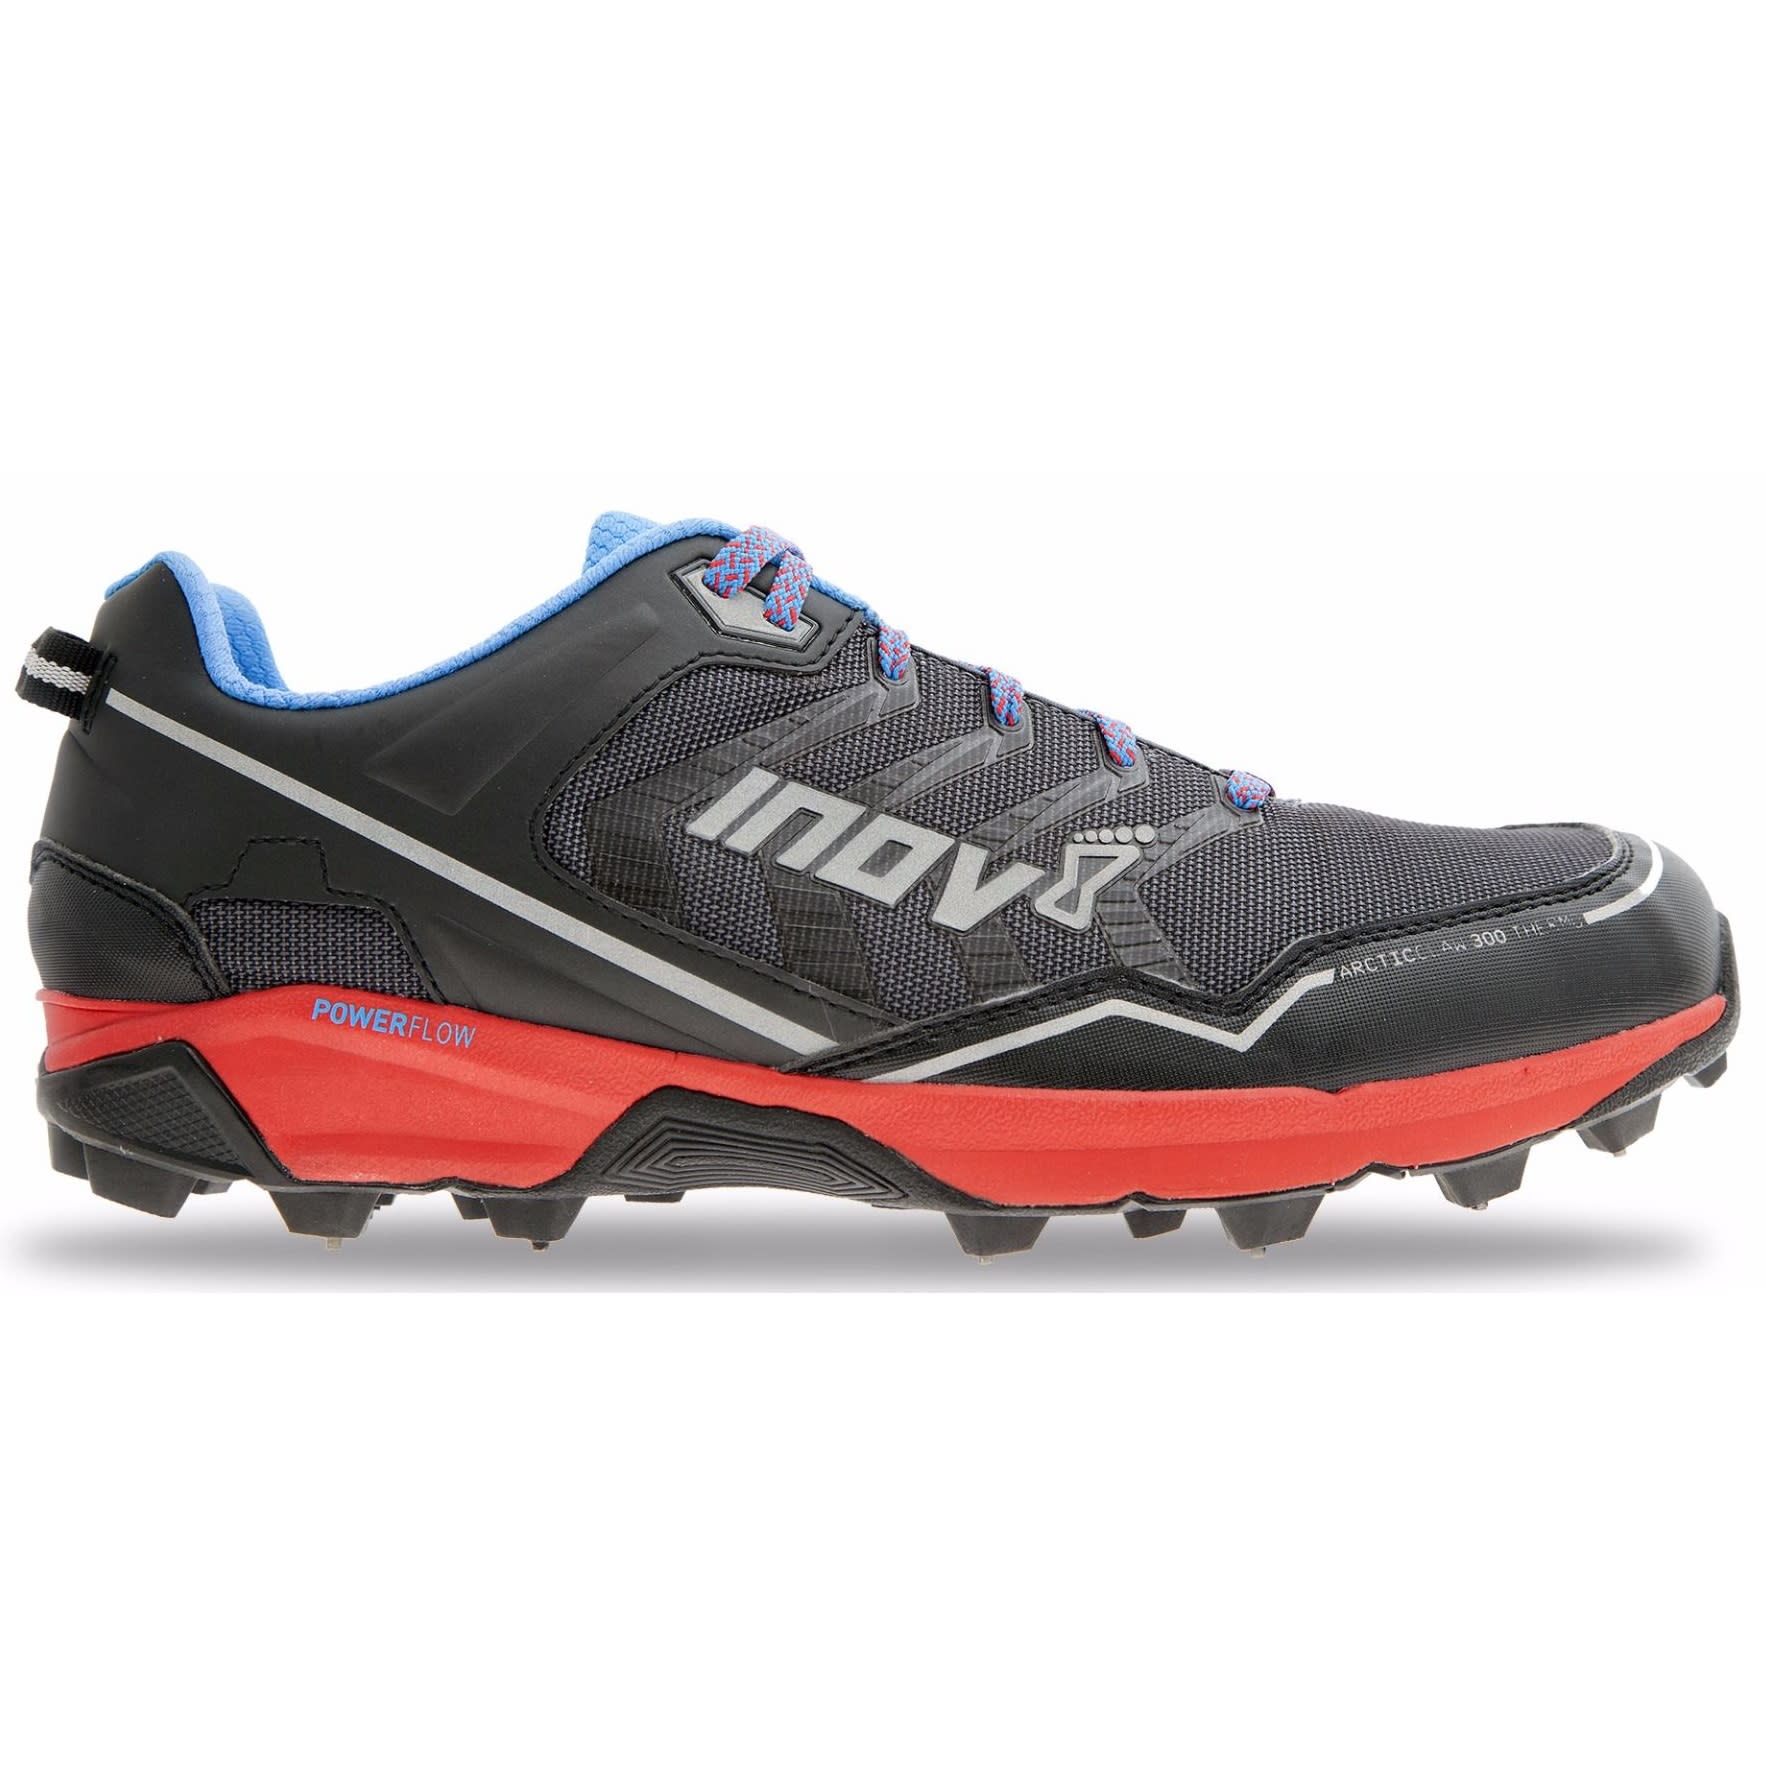 Inov8 Arctic Claw 300 Thermo Unisex Black Trail Running Road Shoes Trainers 